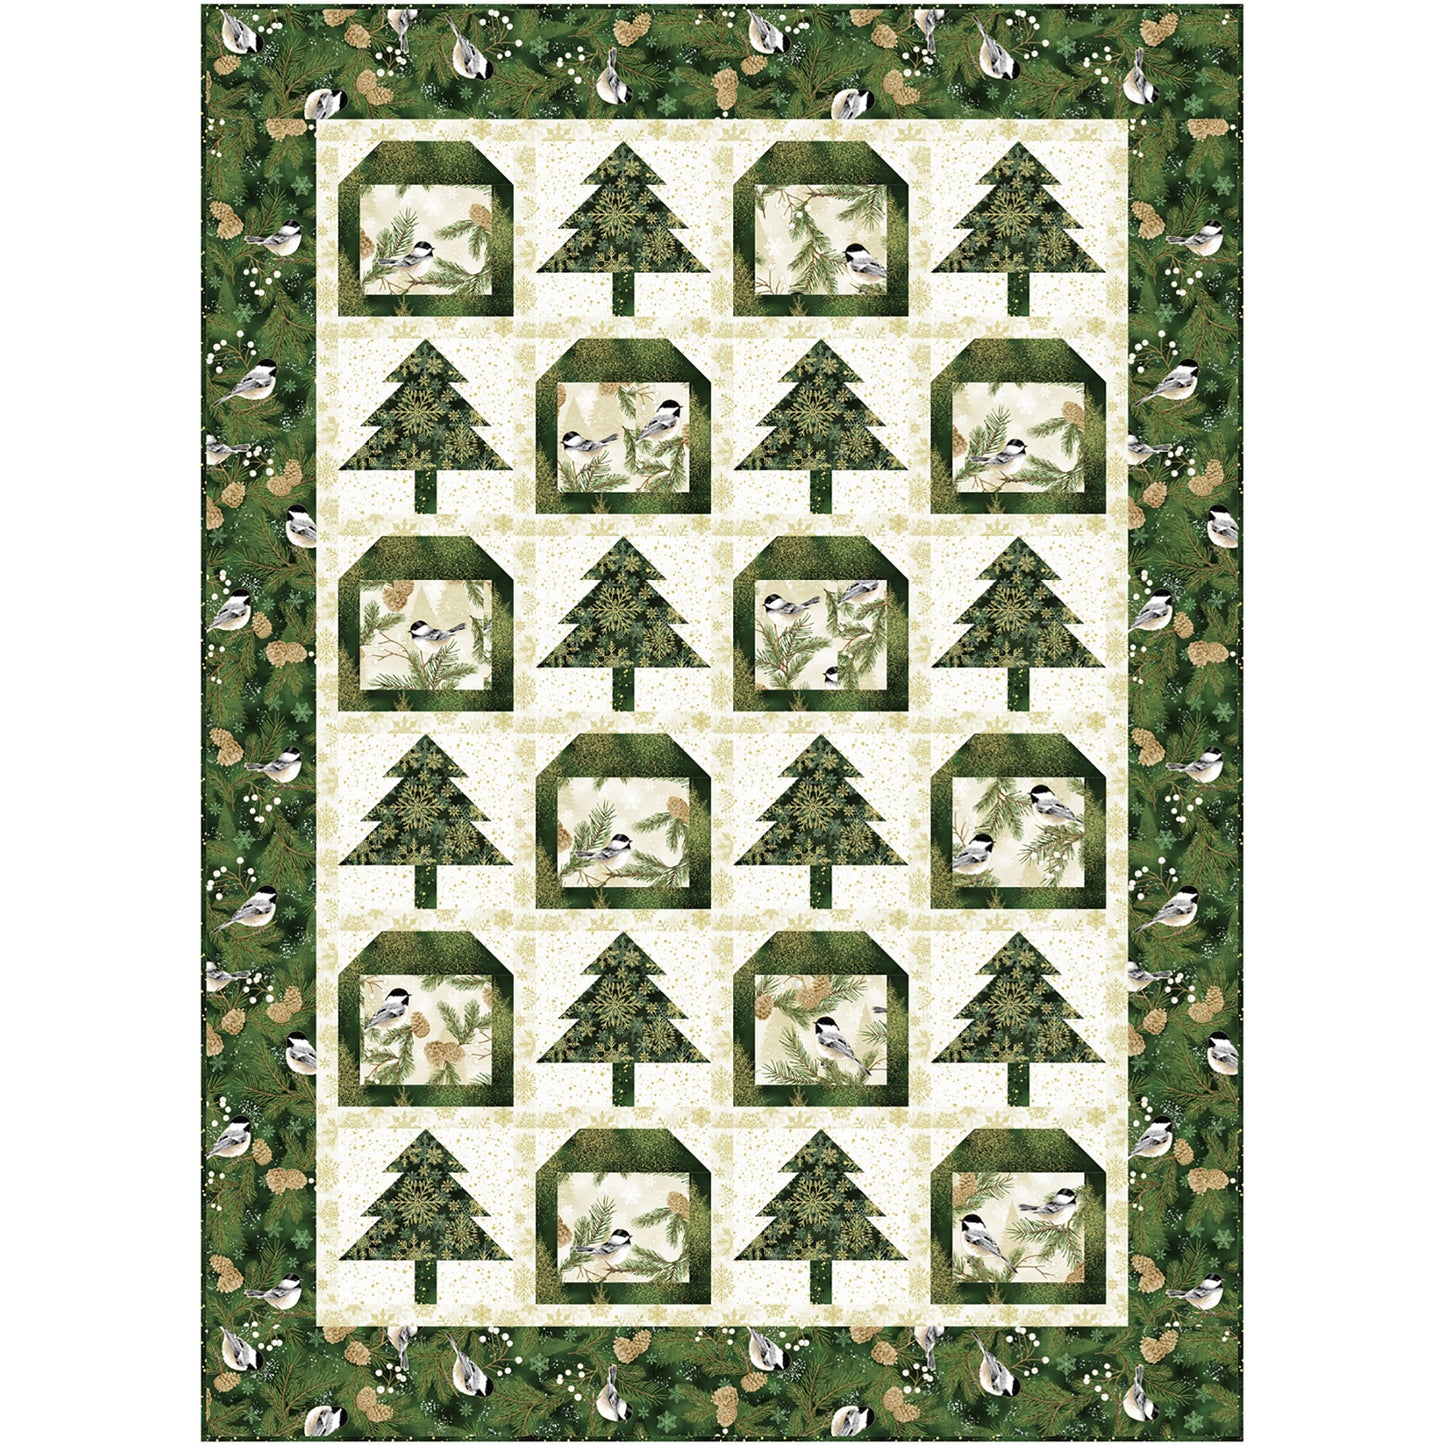 Chickadees and Trees Quilt Pattern CJC-55362 - Paper Pattern